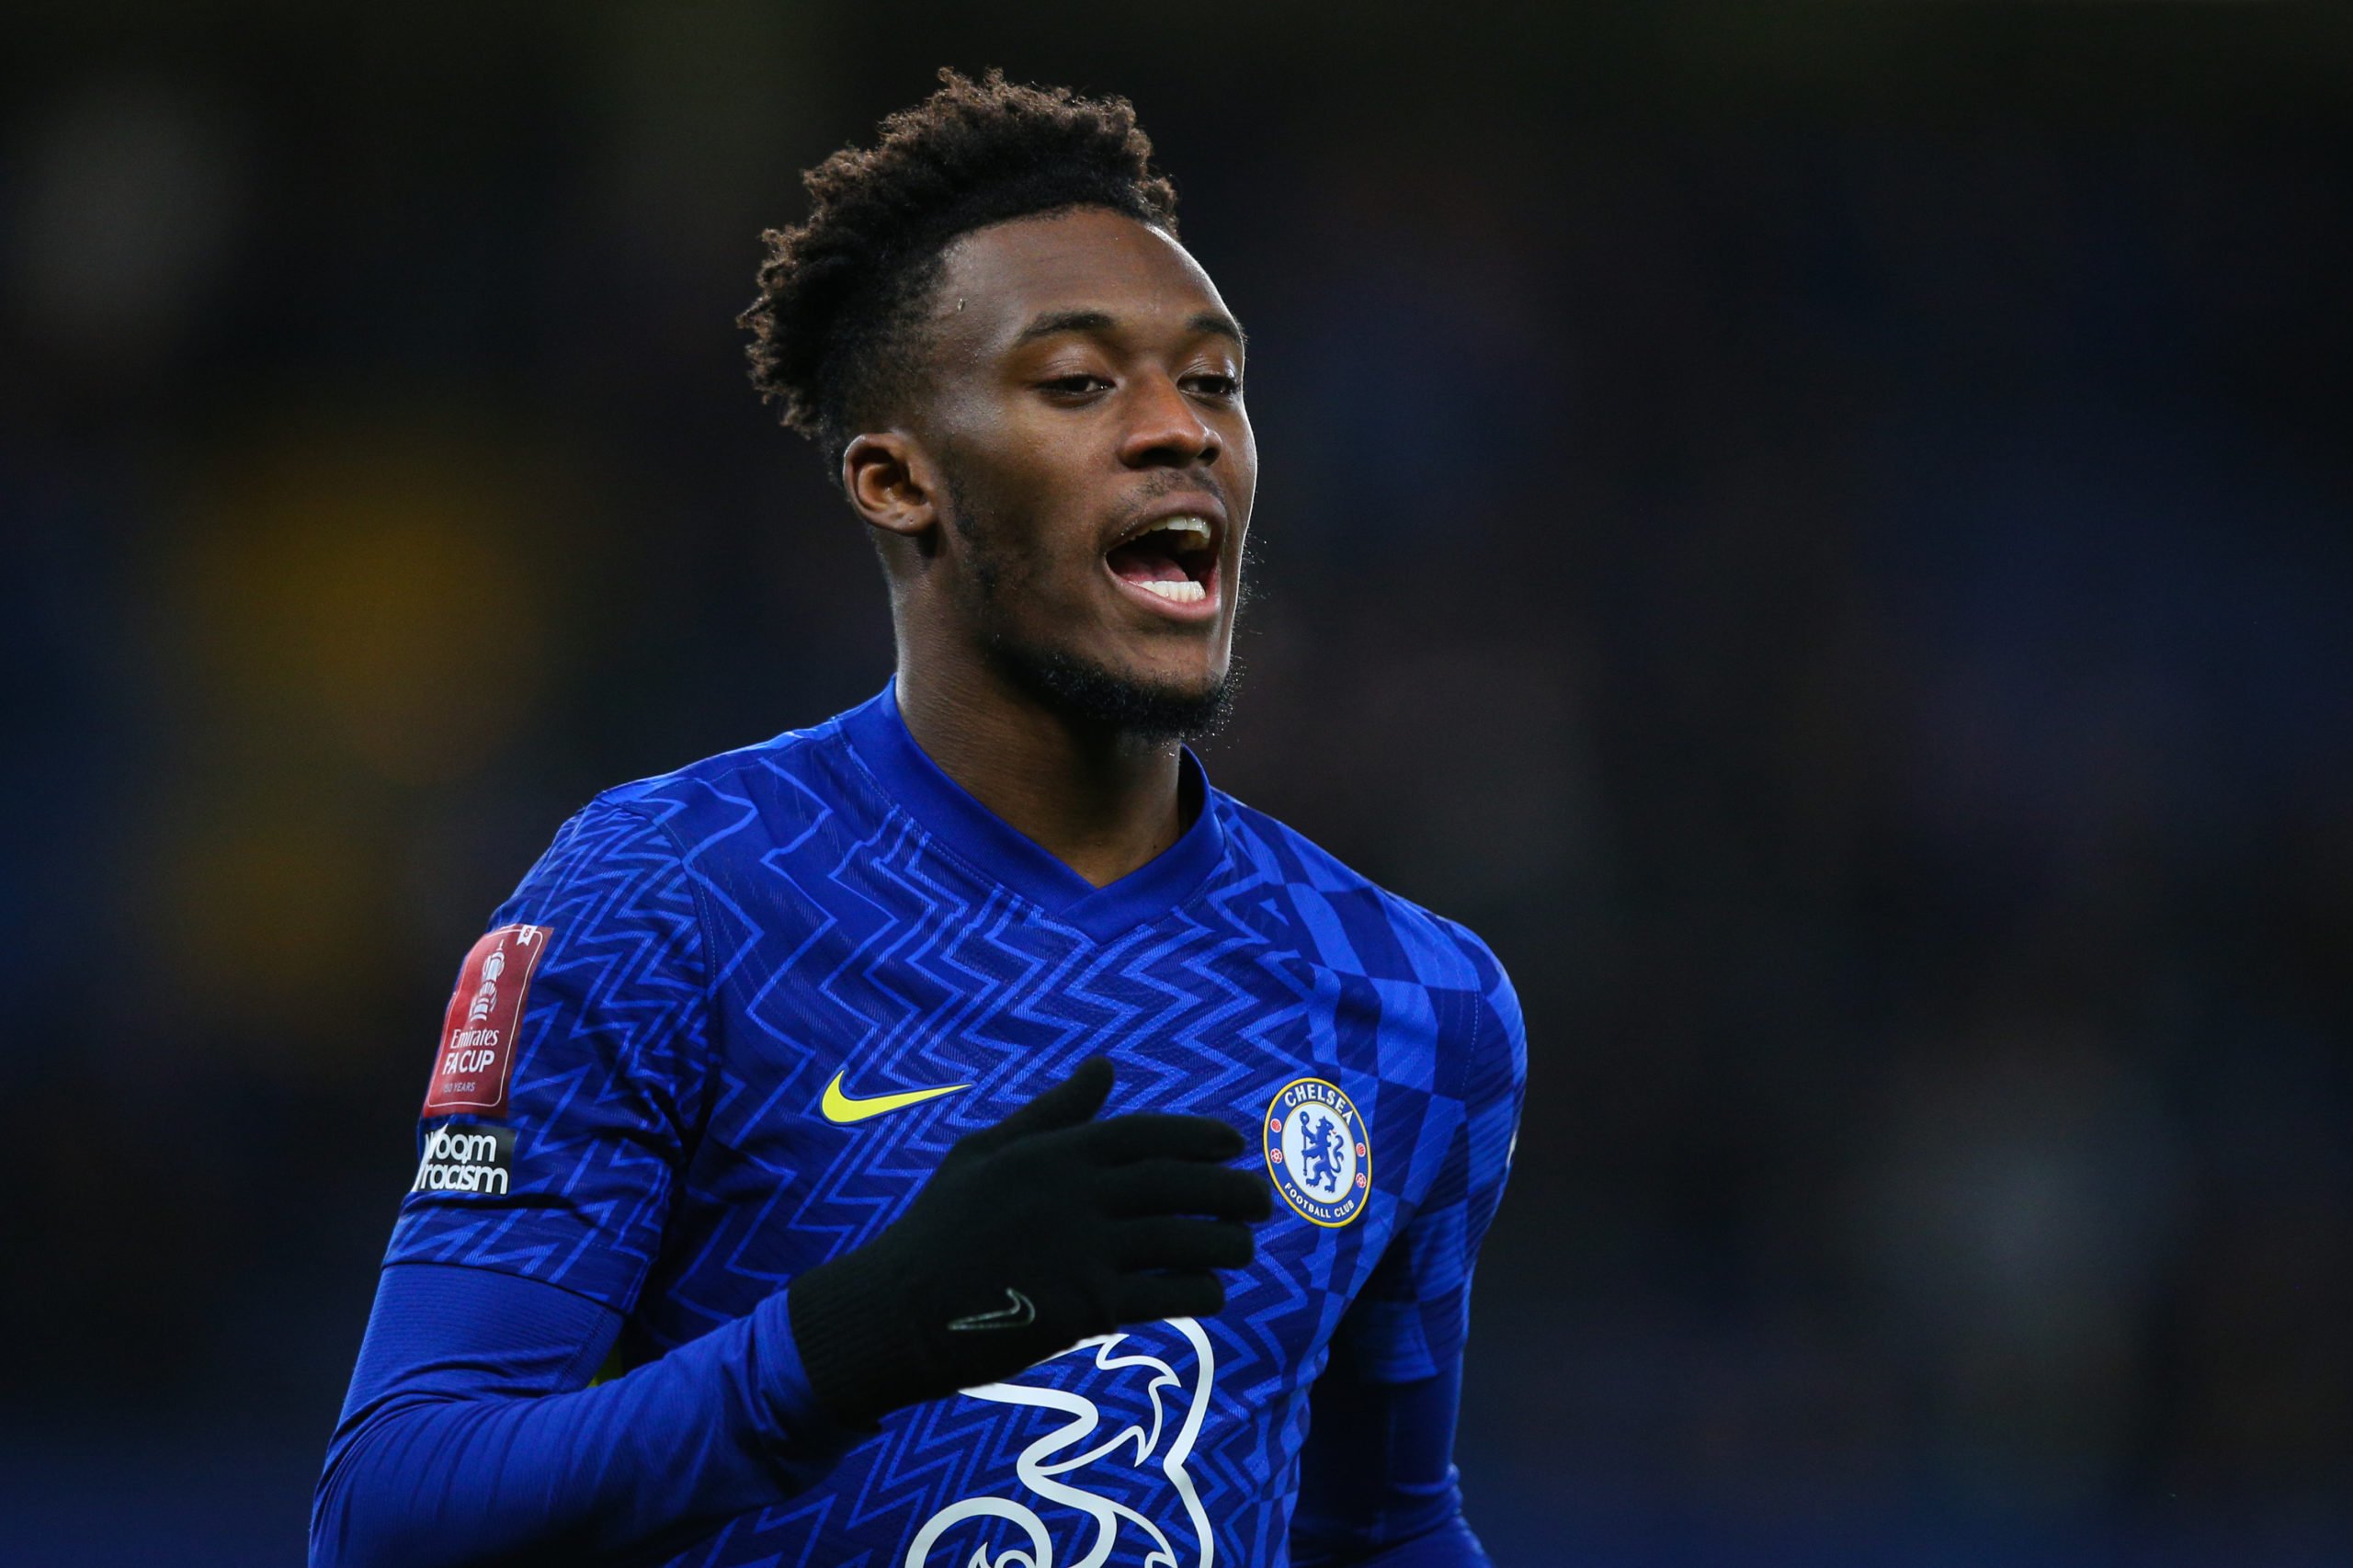 Hudson-Odoi says everyone noticed how confident Chelsea teammate was during Chesterfield win